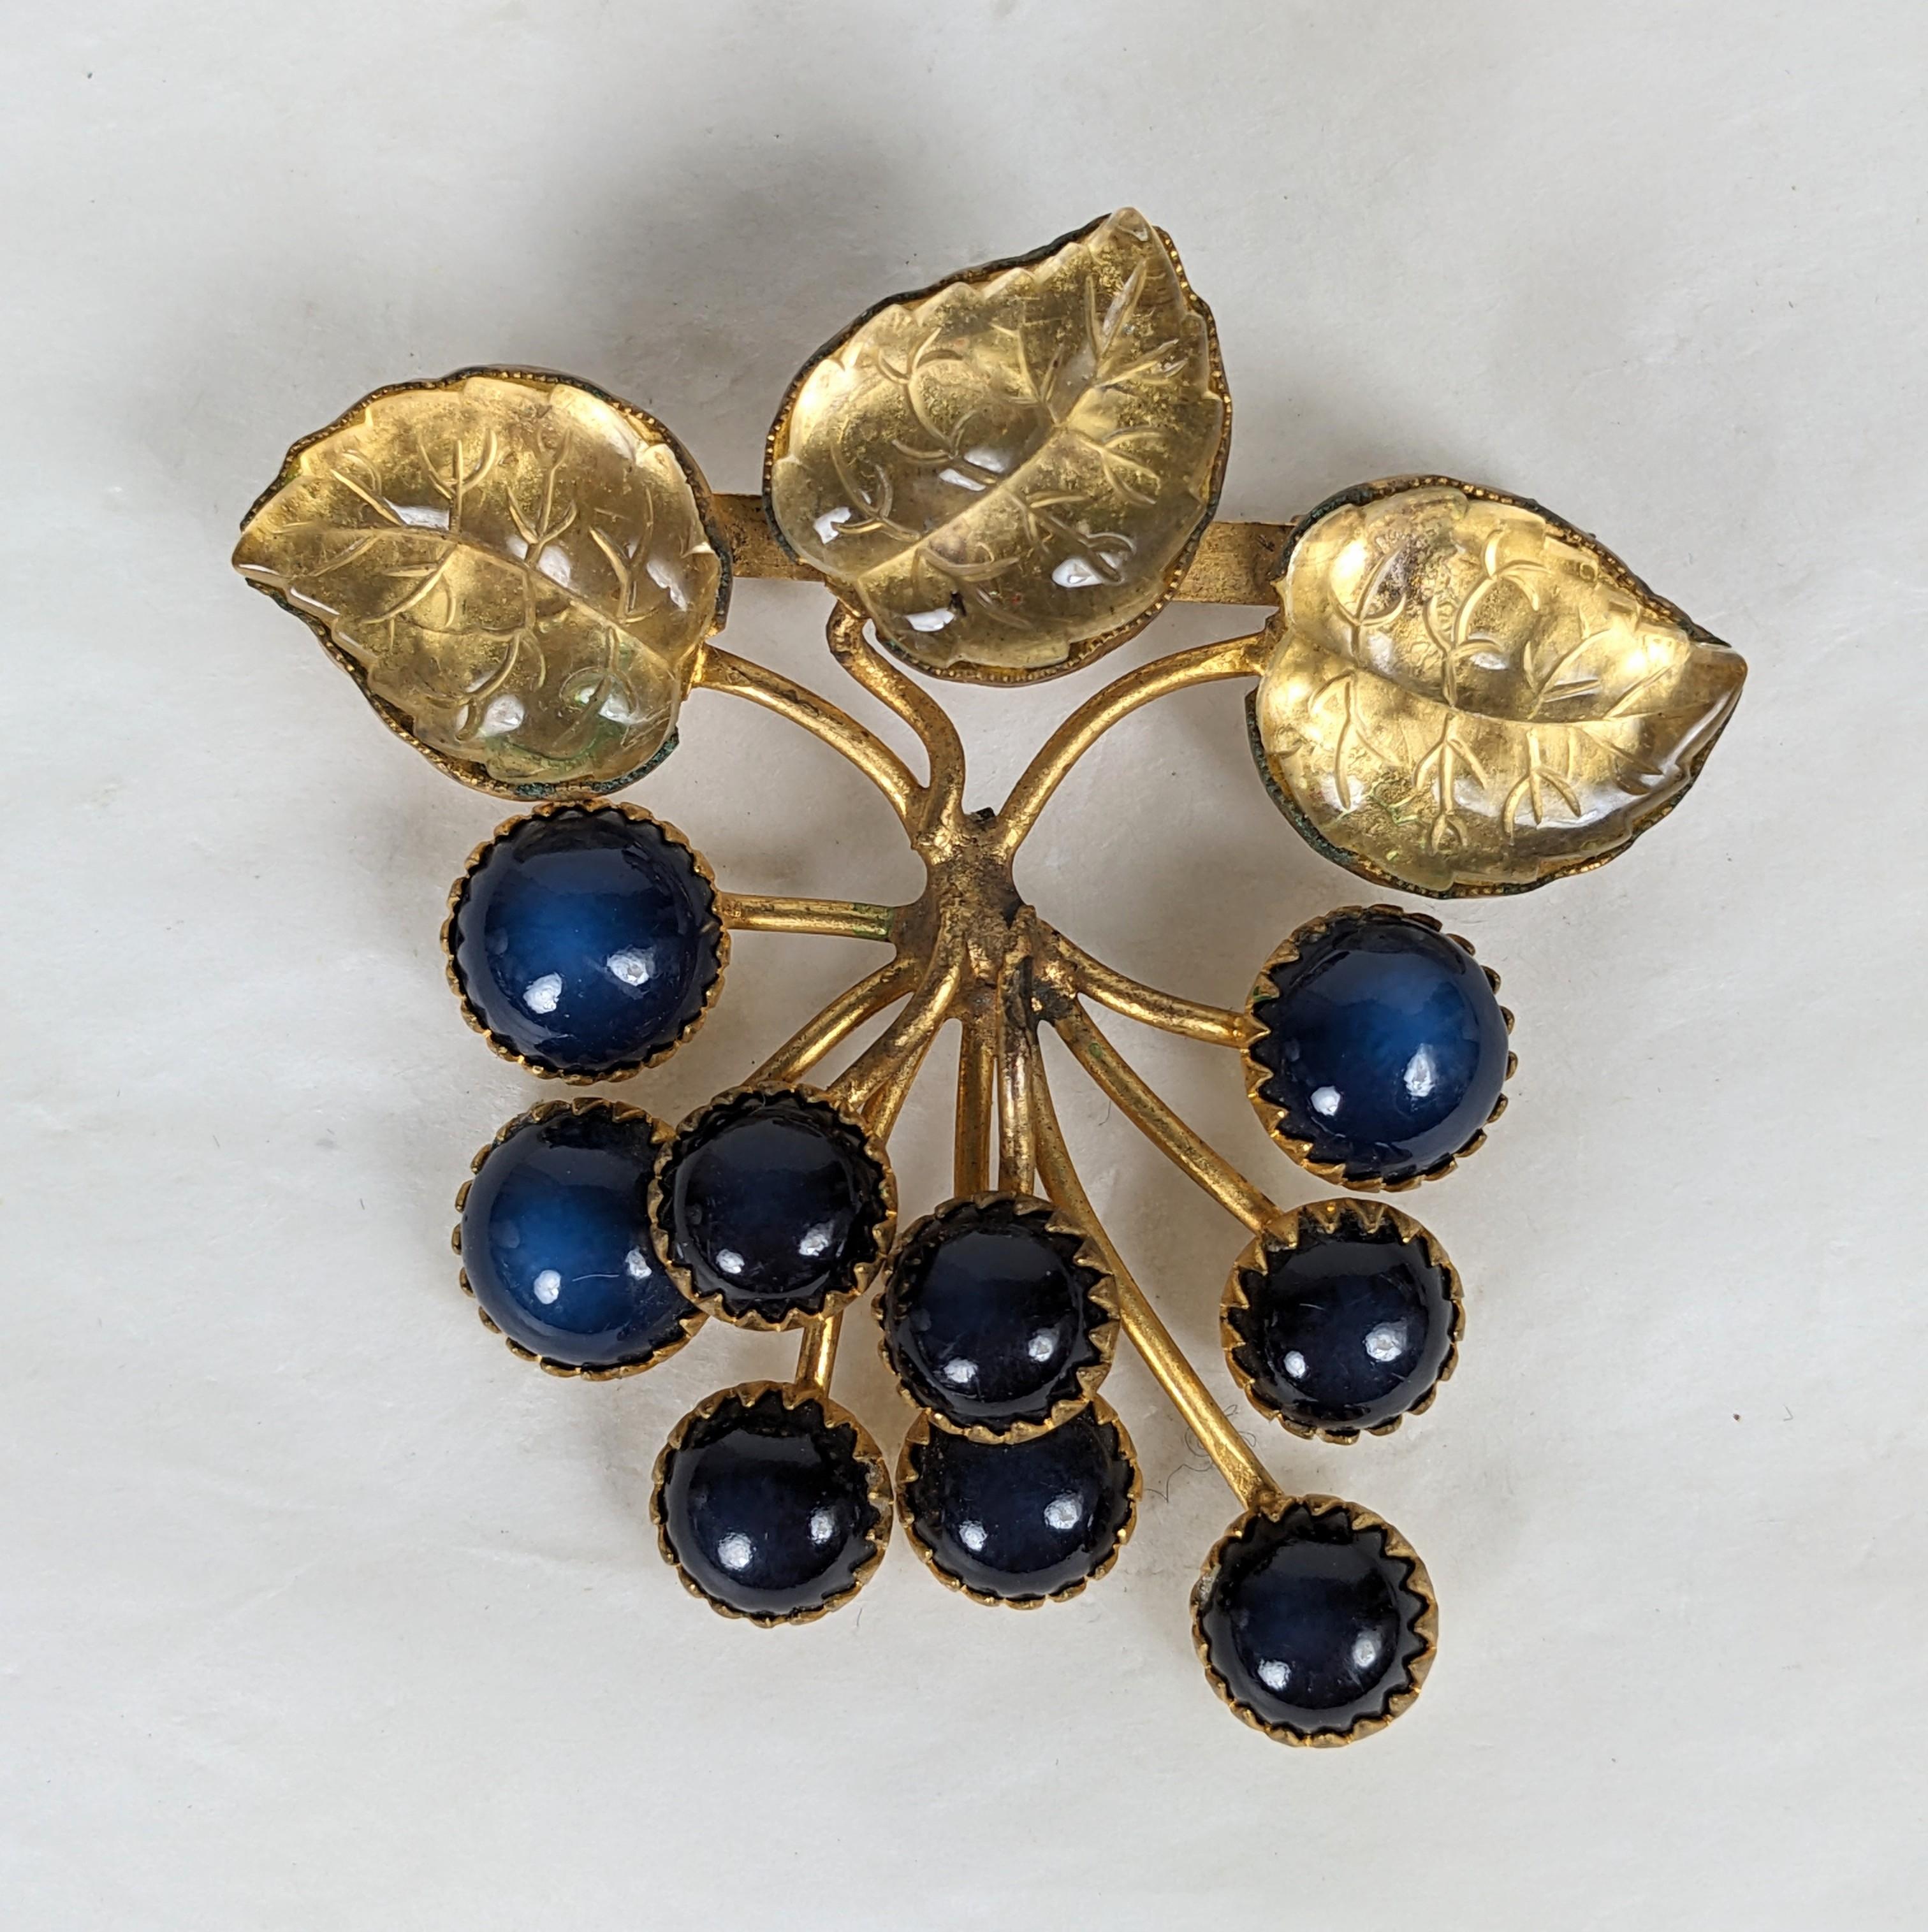 Rare Countess Cis Berry Brooch from the 1960's. Designed with a deep blue glass berries with molded citrine glass leaves set into gilt bronze filigree settings. Unsigned but recognized as a Countess Cis design. French closure. 1960's France. 2.25